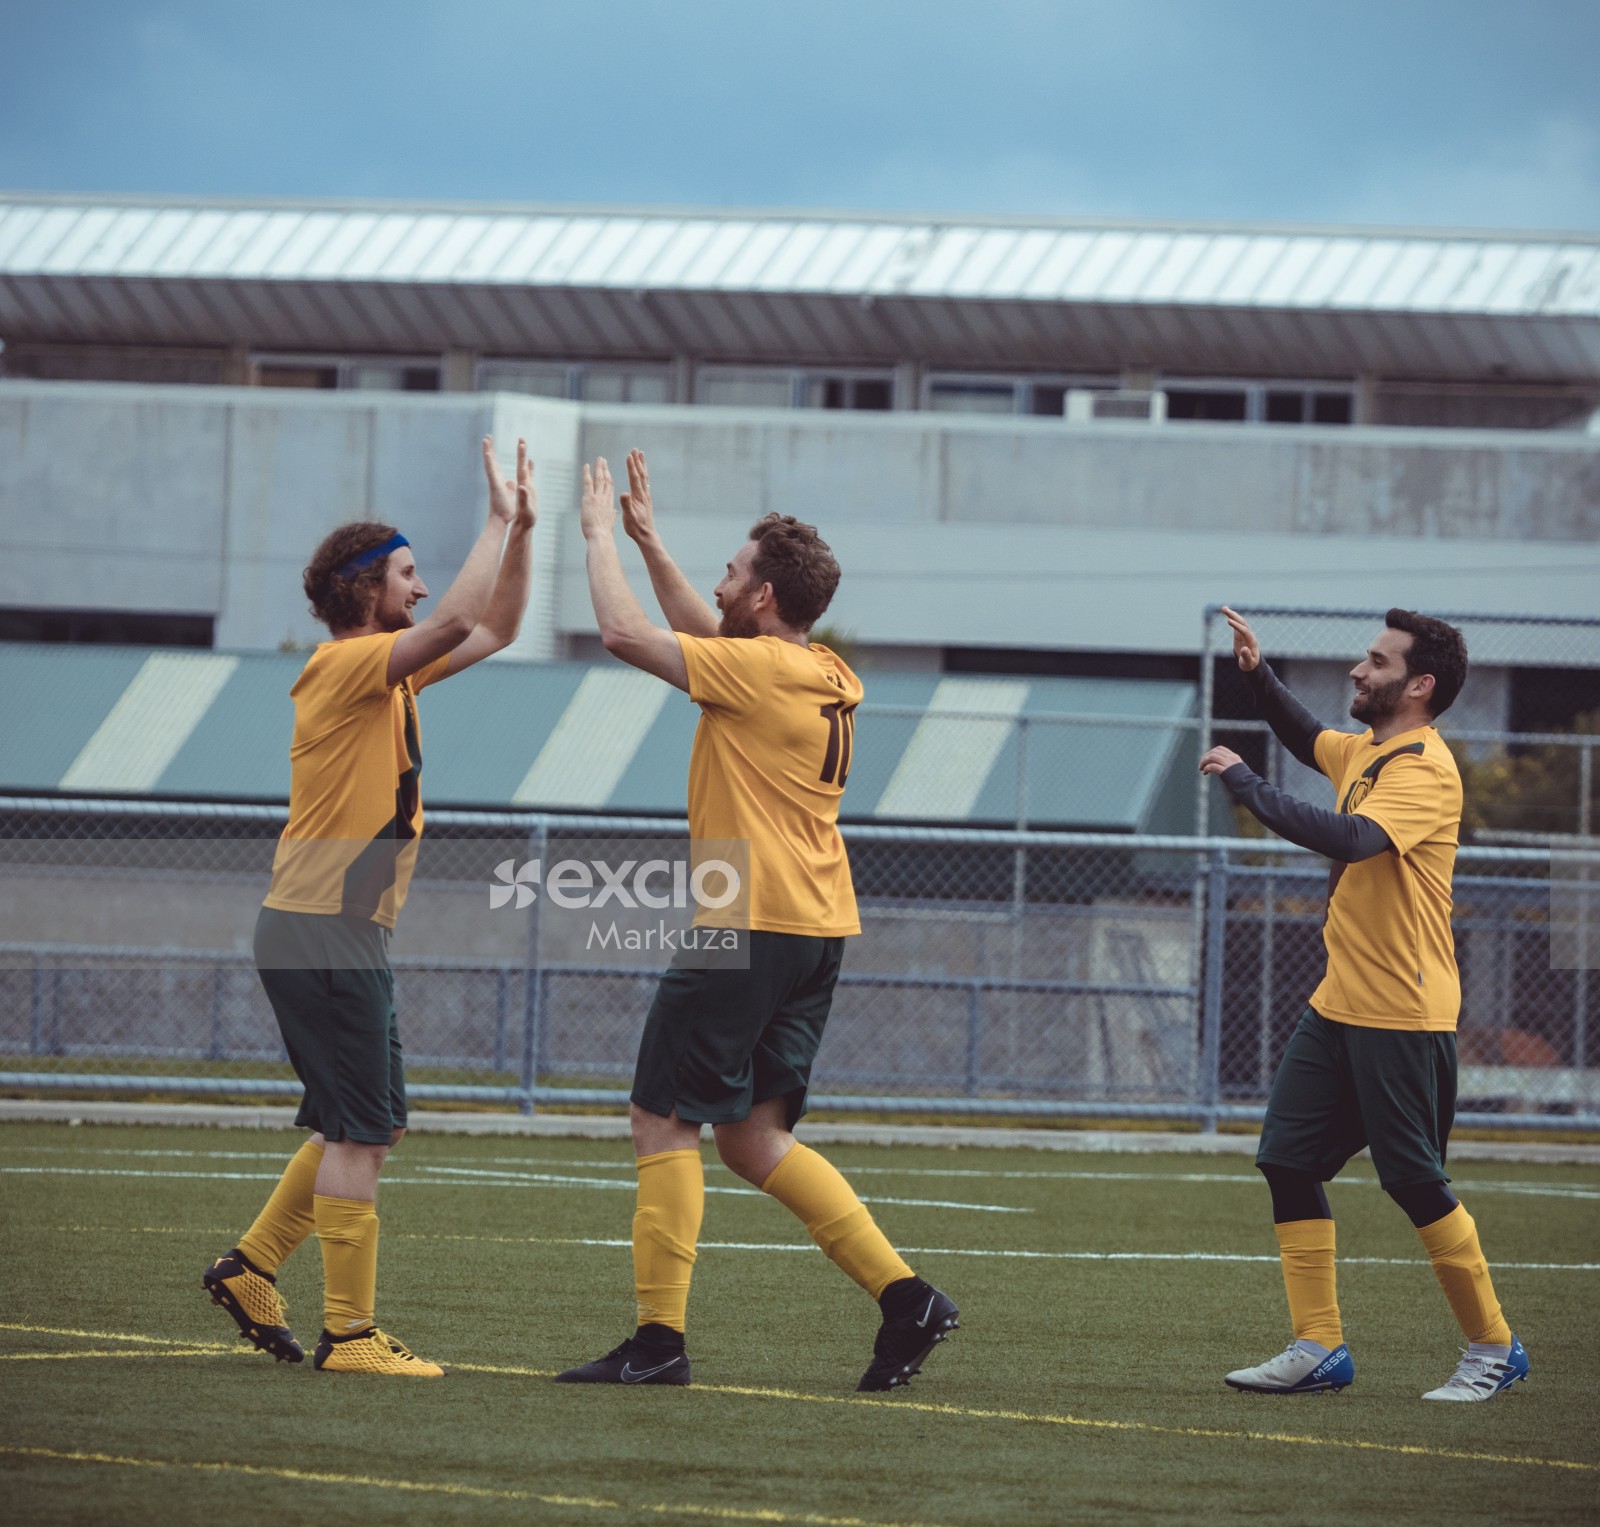 Players double high fiving - Sports Zone sunday league